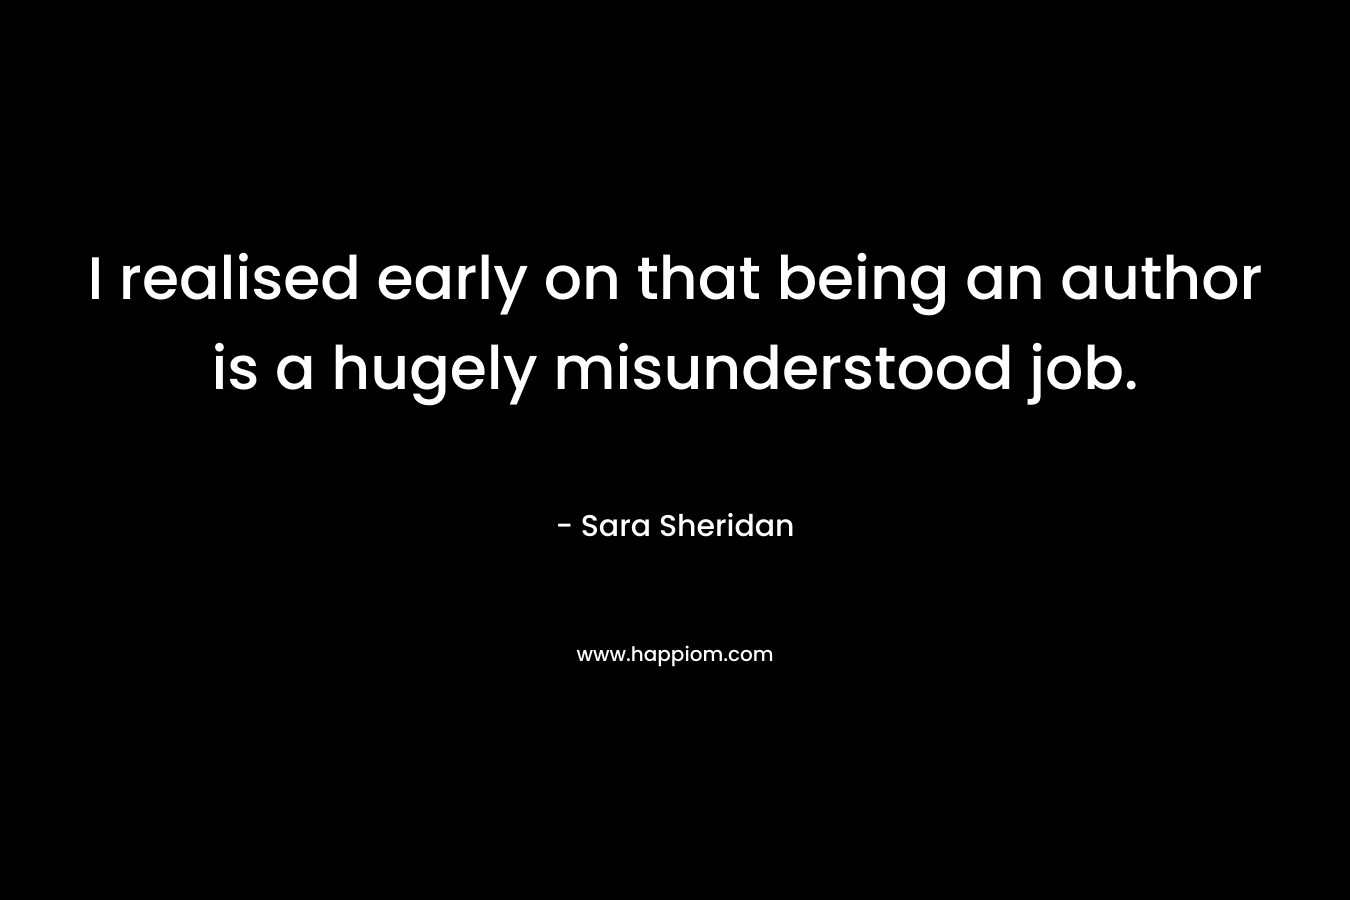 I realised early on that being an author is a hugely misunderstood job. – Sara Sheridan